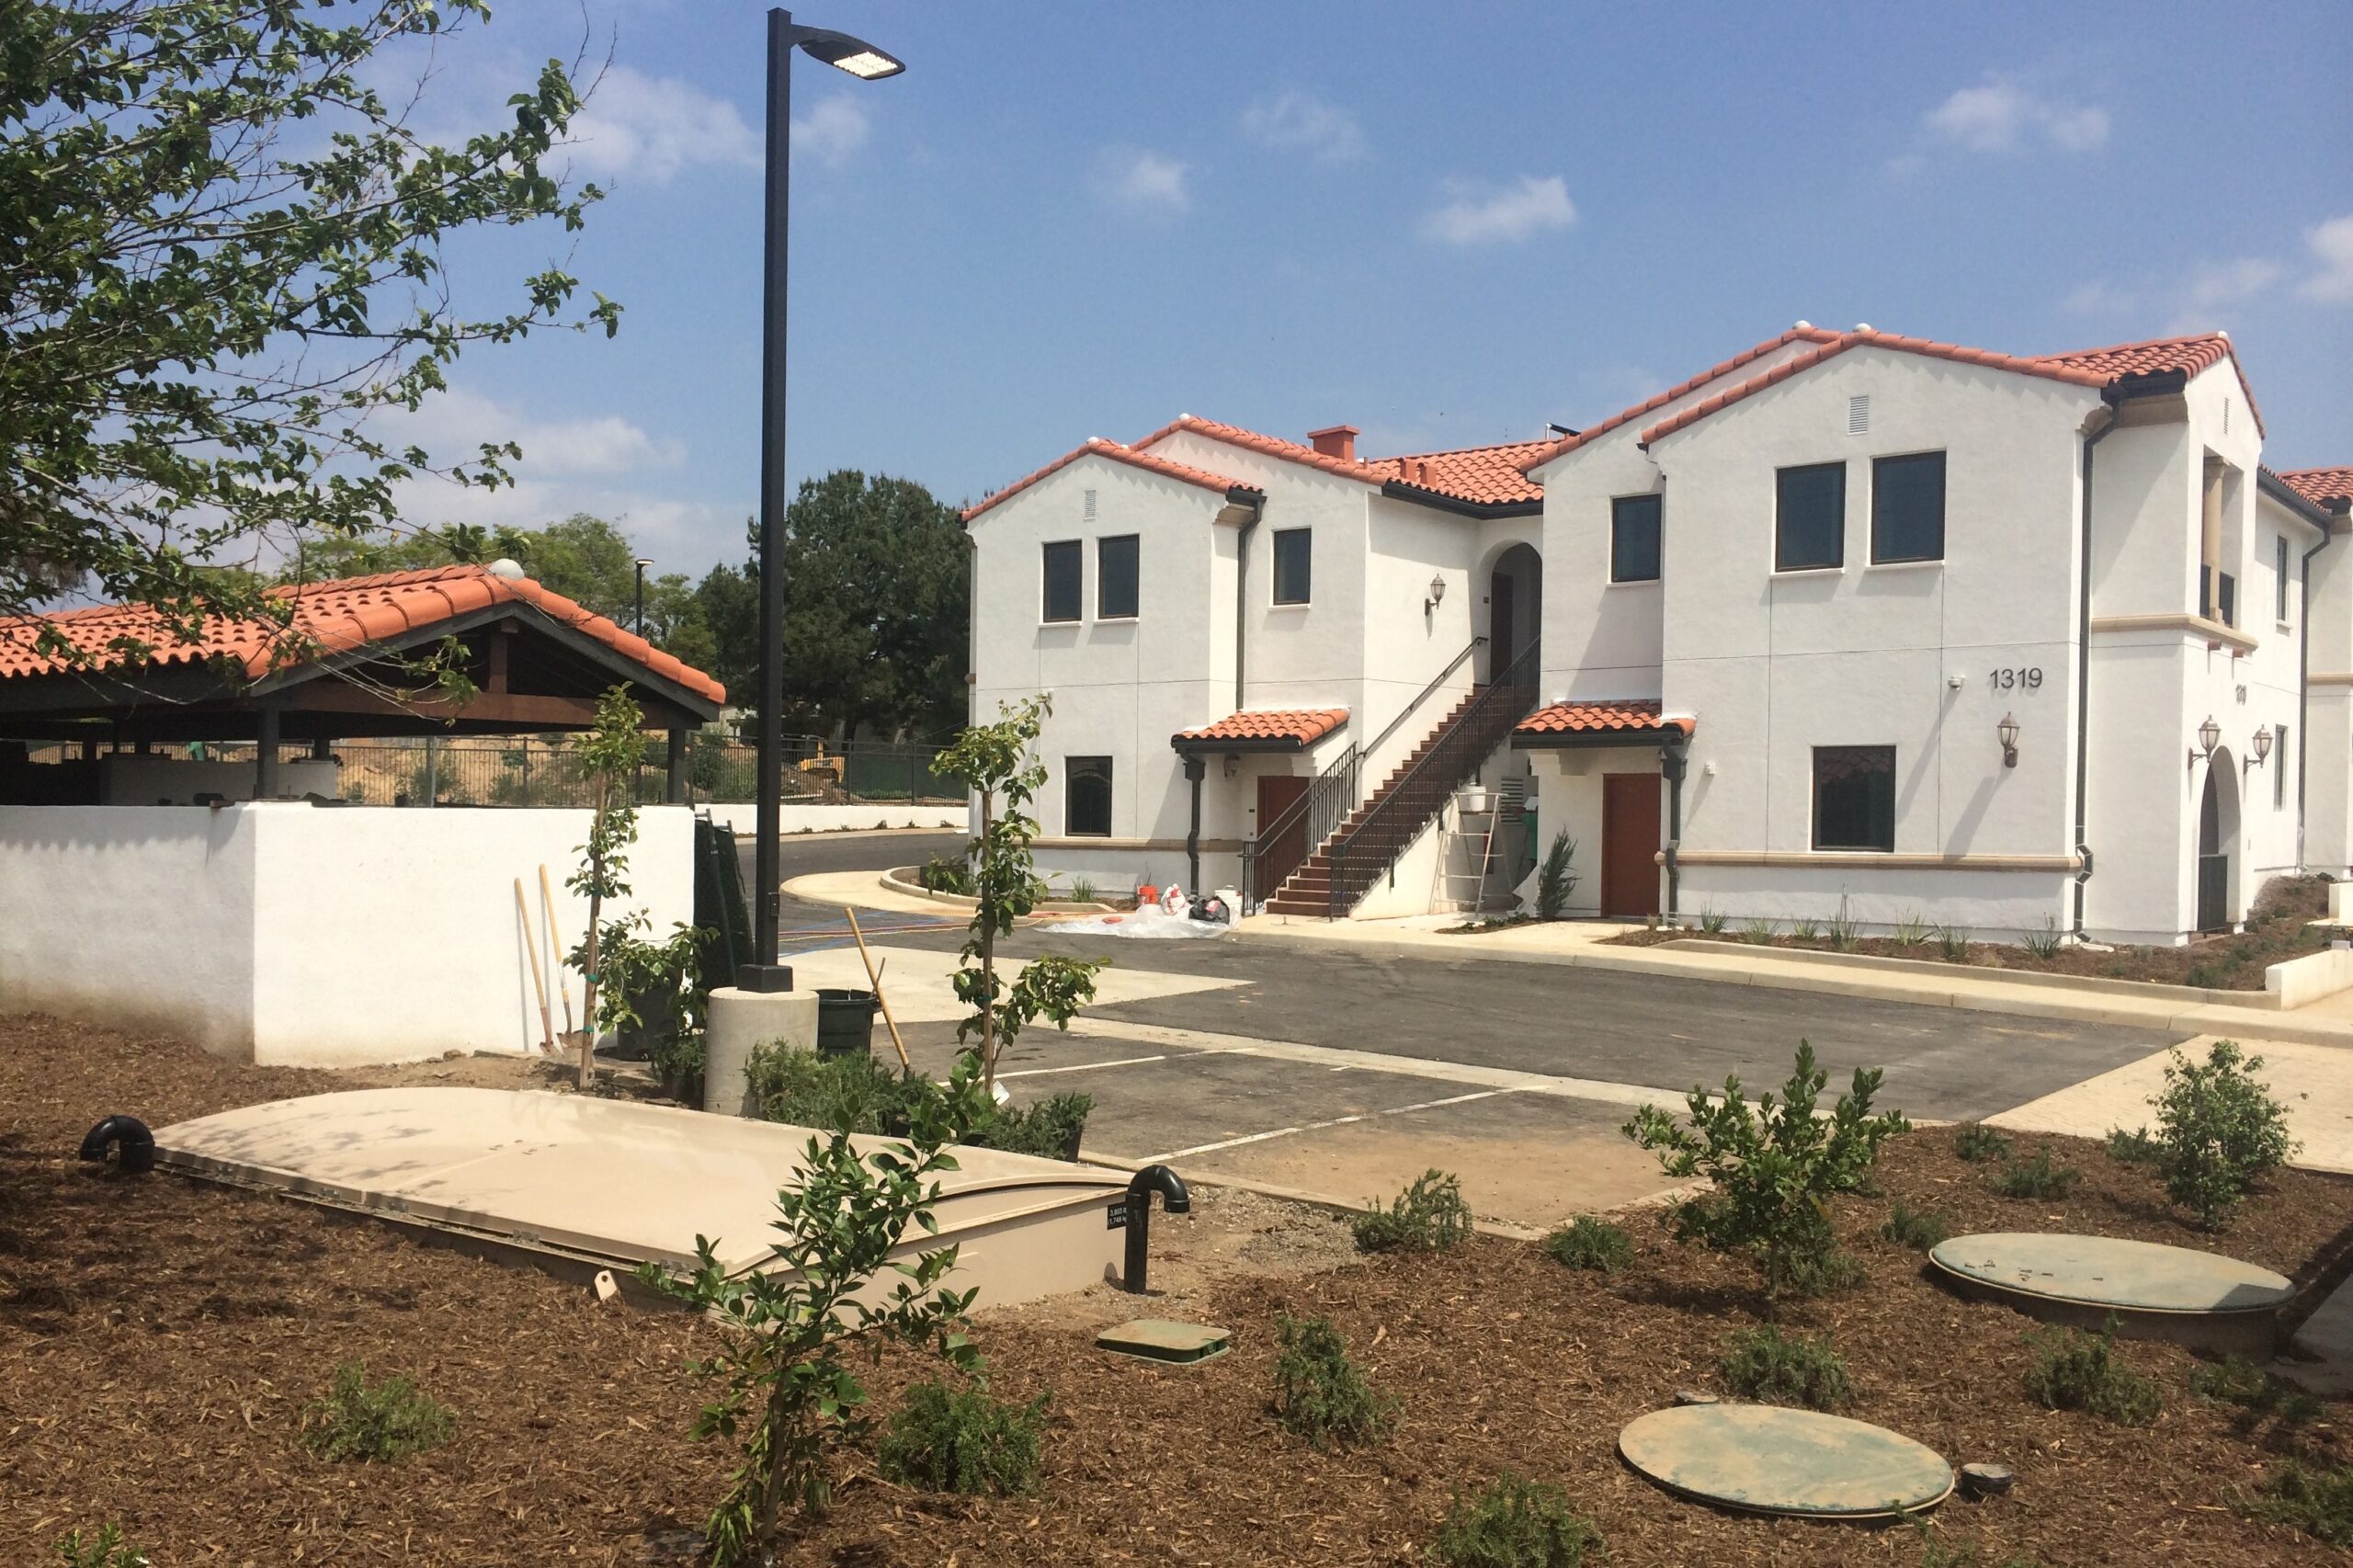 Affordable housing community with parking lot, light pole, and greywater system.